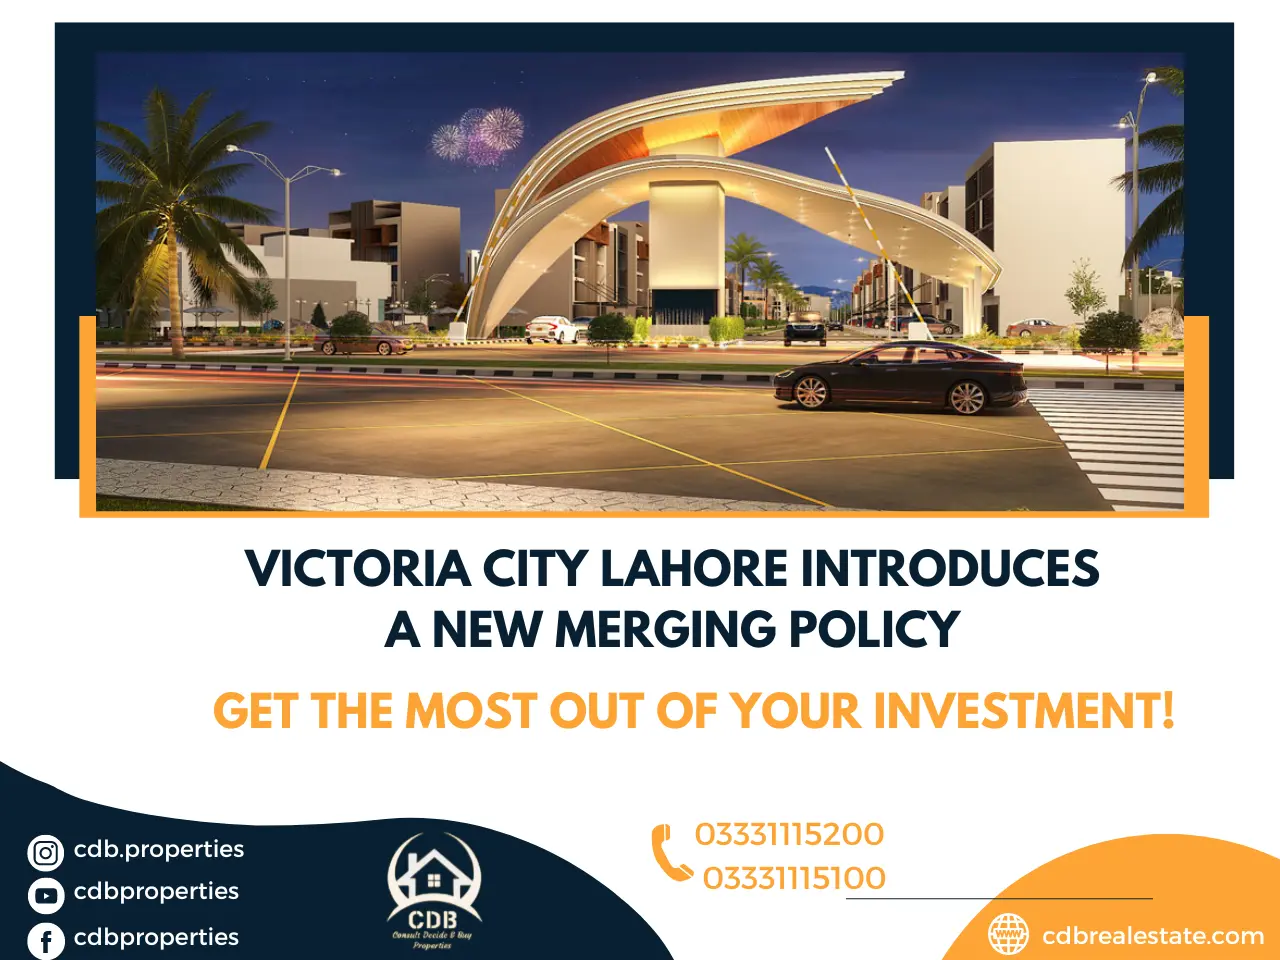 Victoria City Lahore Introduces a New Merging Policy